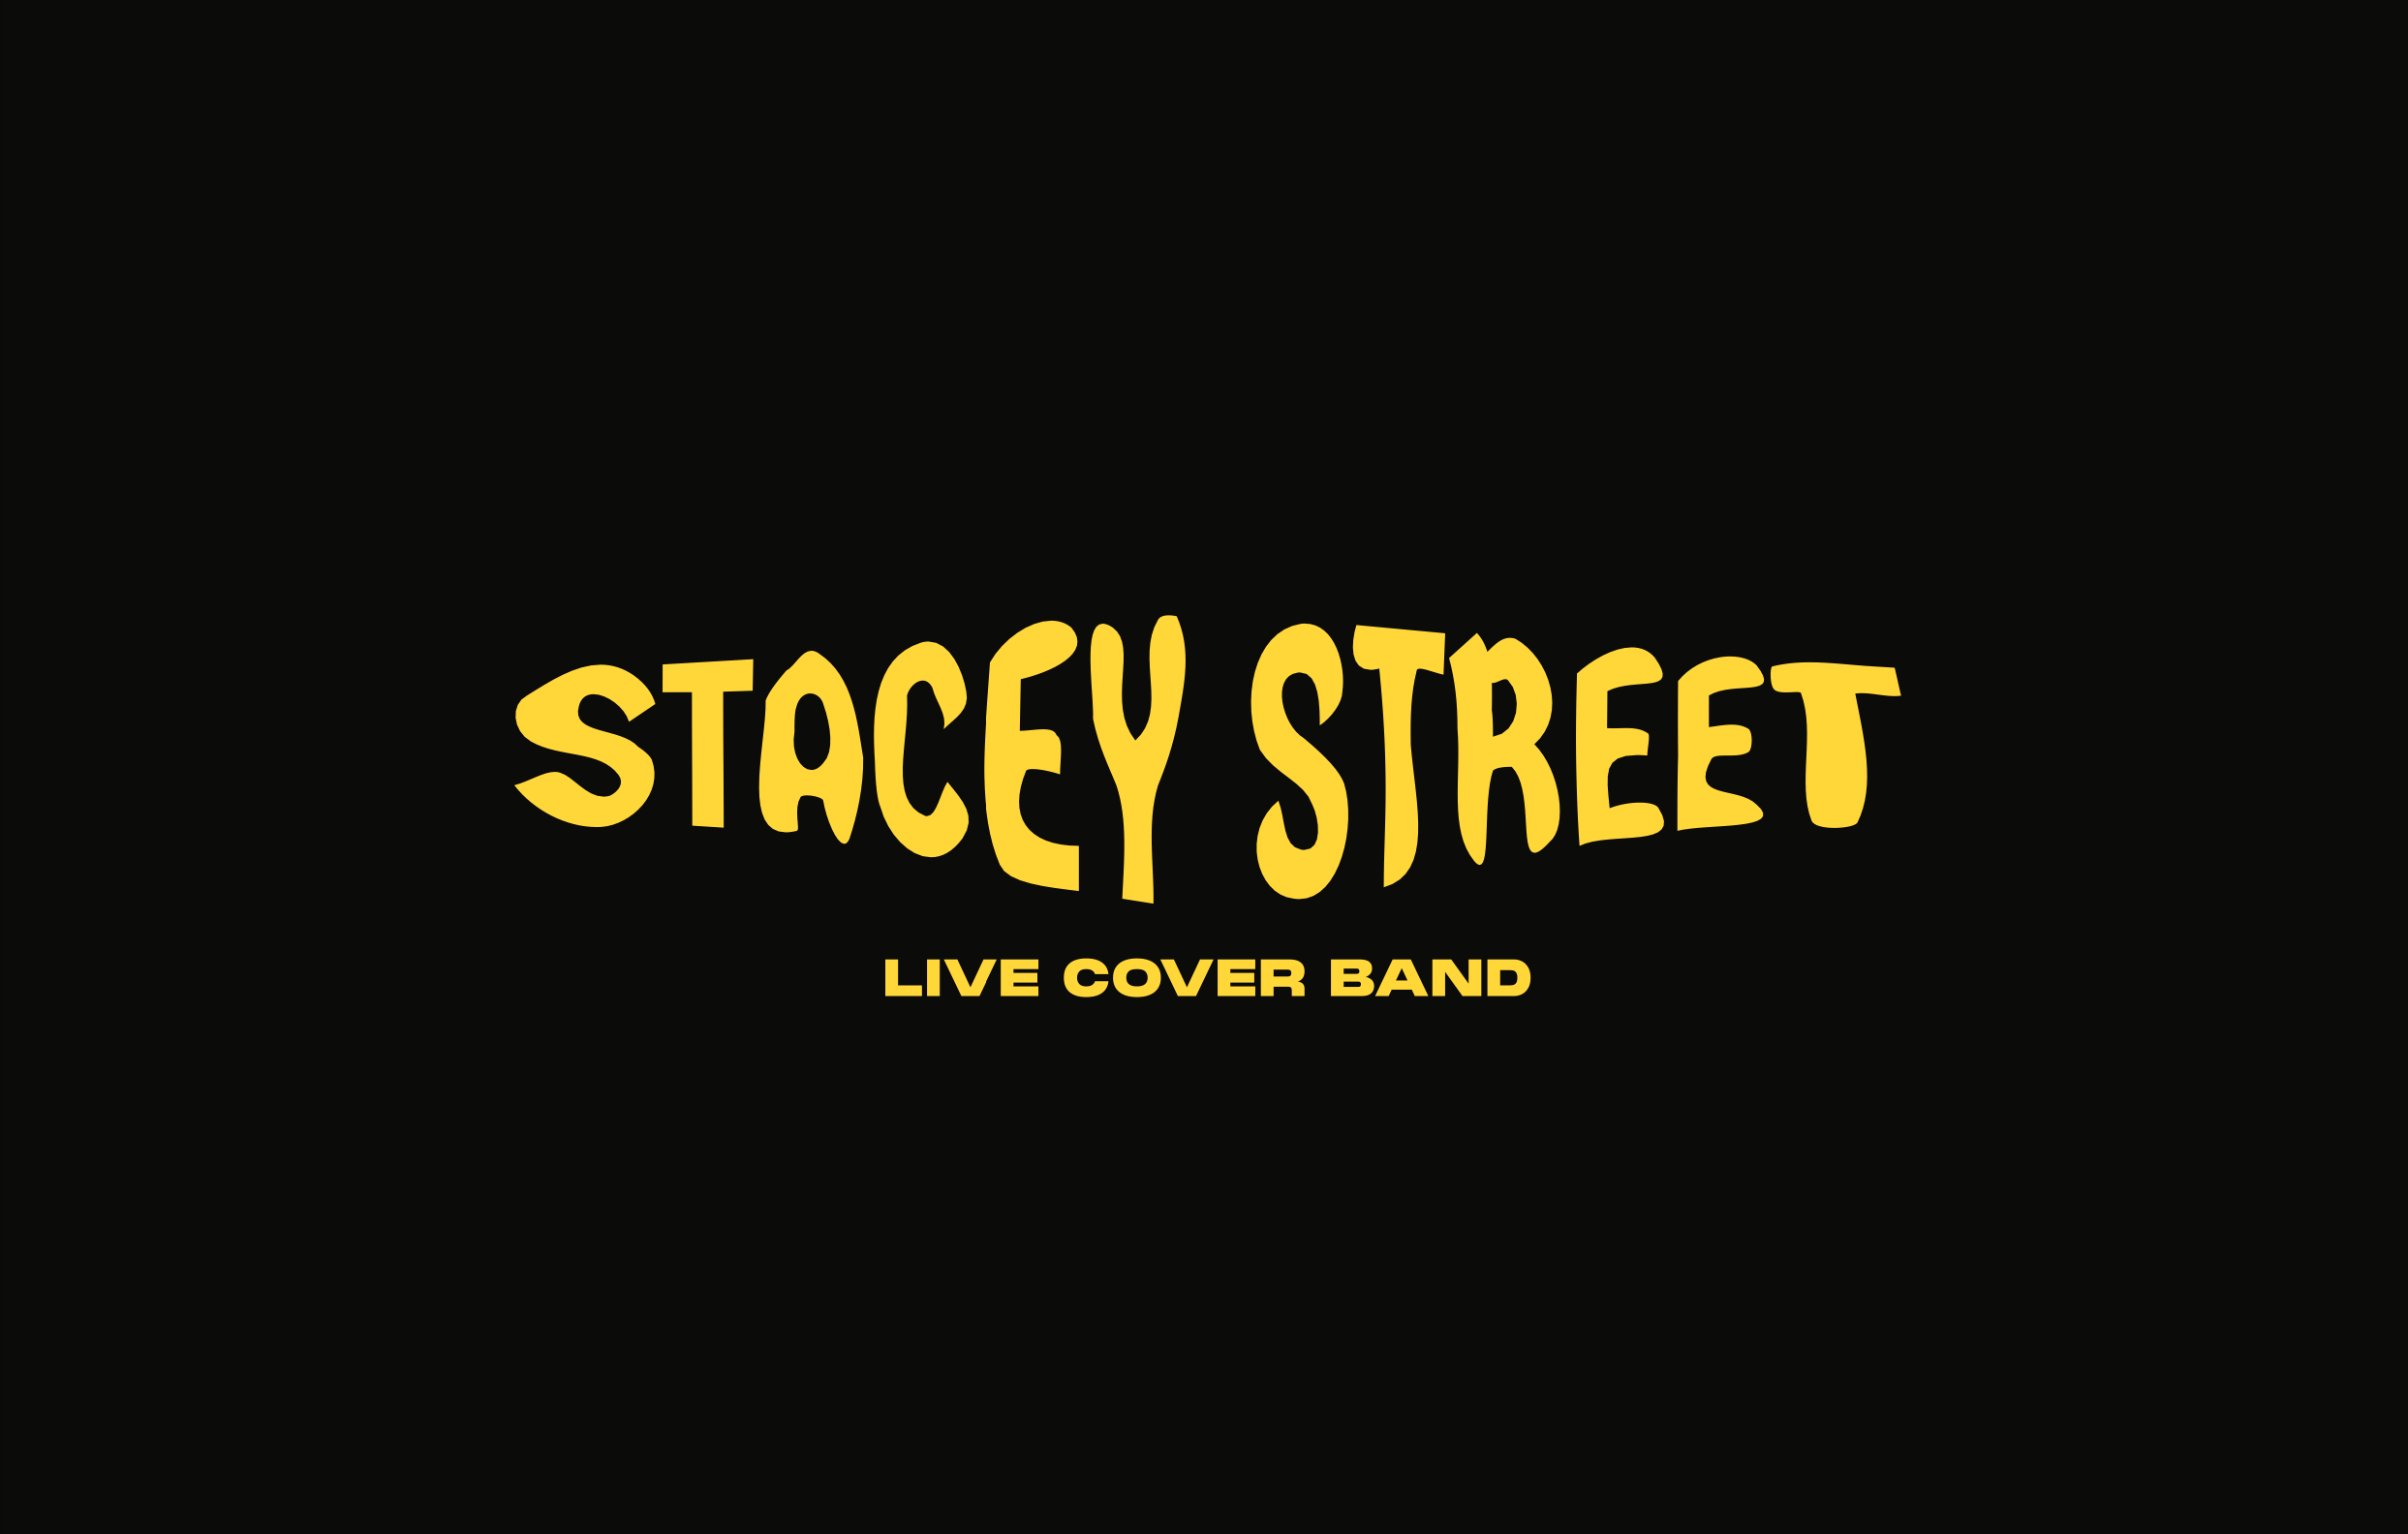 Stacey Street's profile image